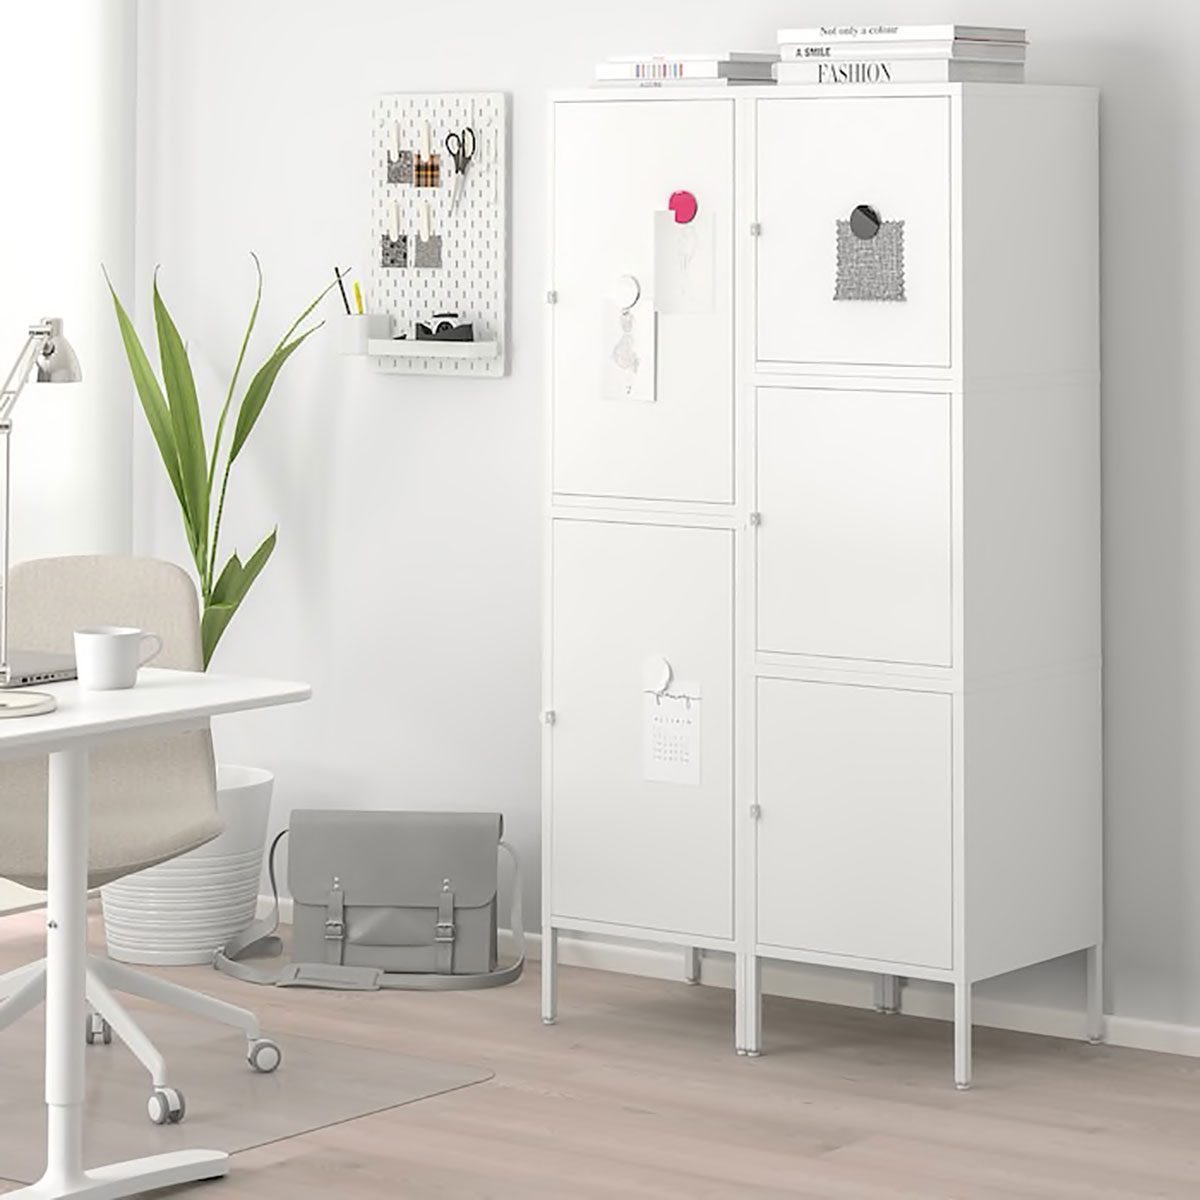 10 Best Storage Cabinets for Your Home Office | The Family Handyman